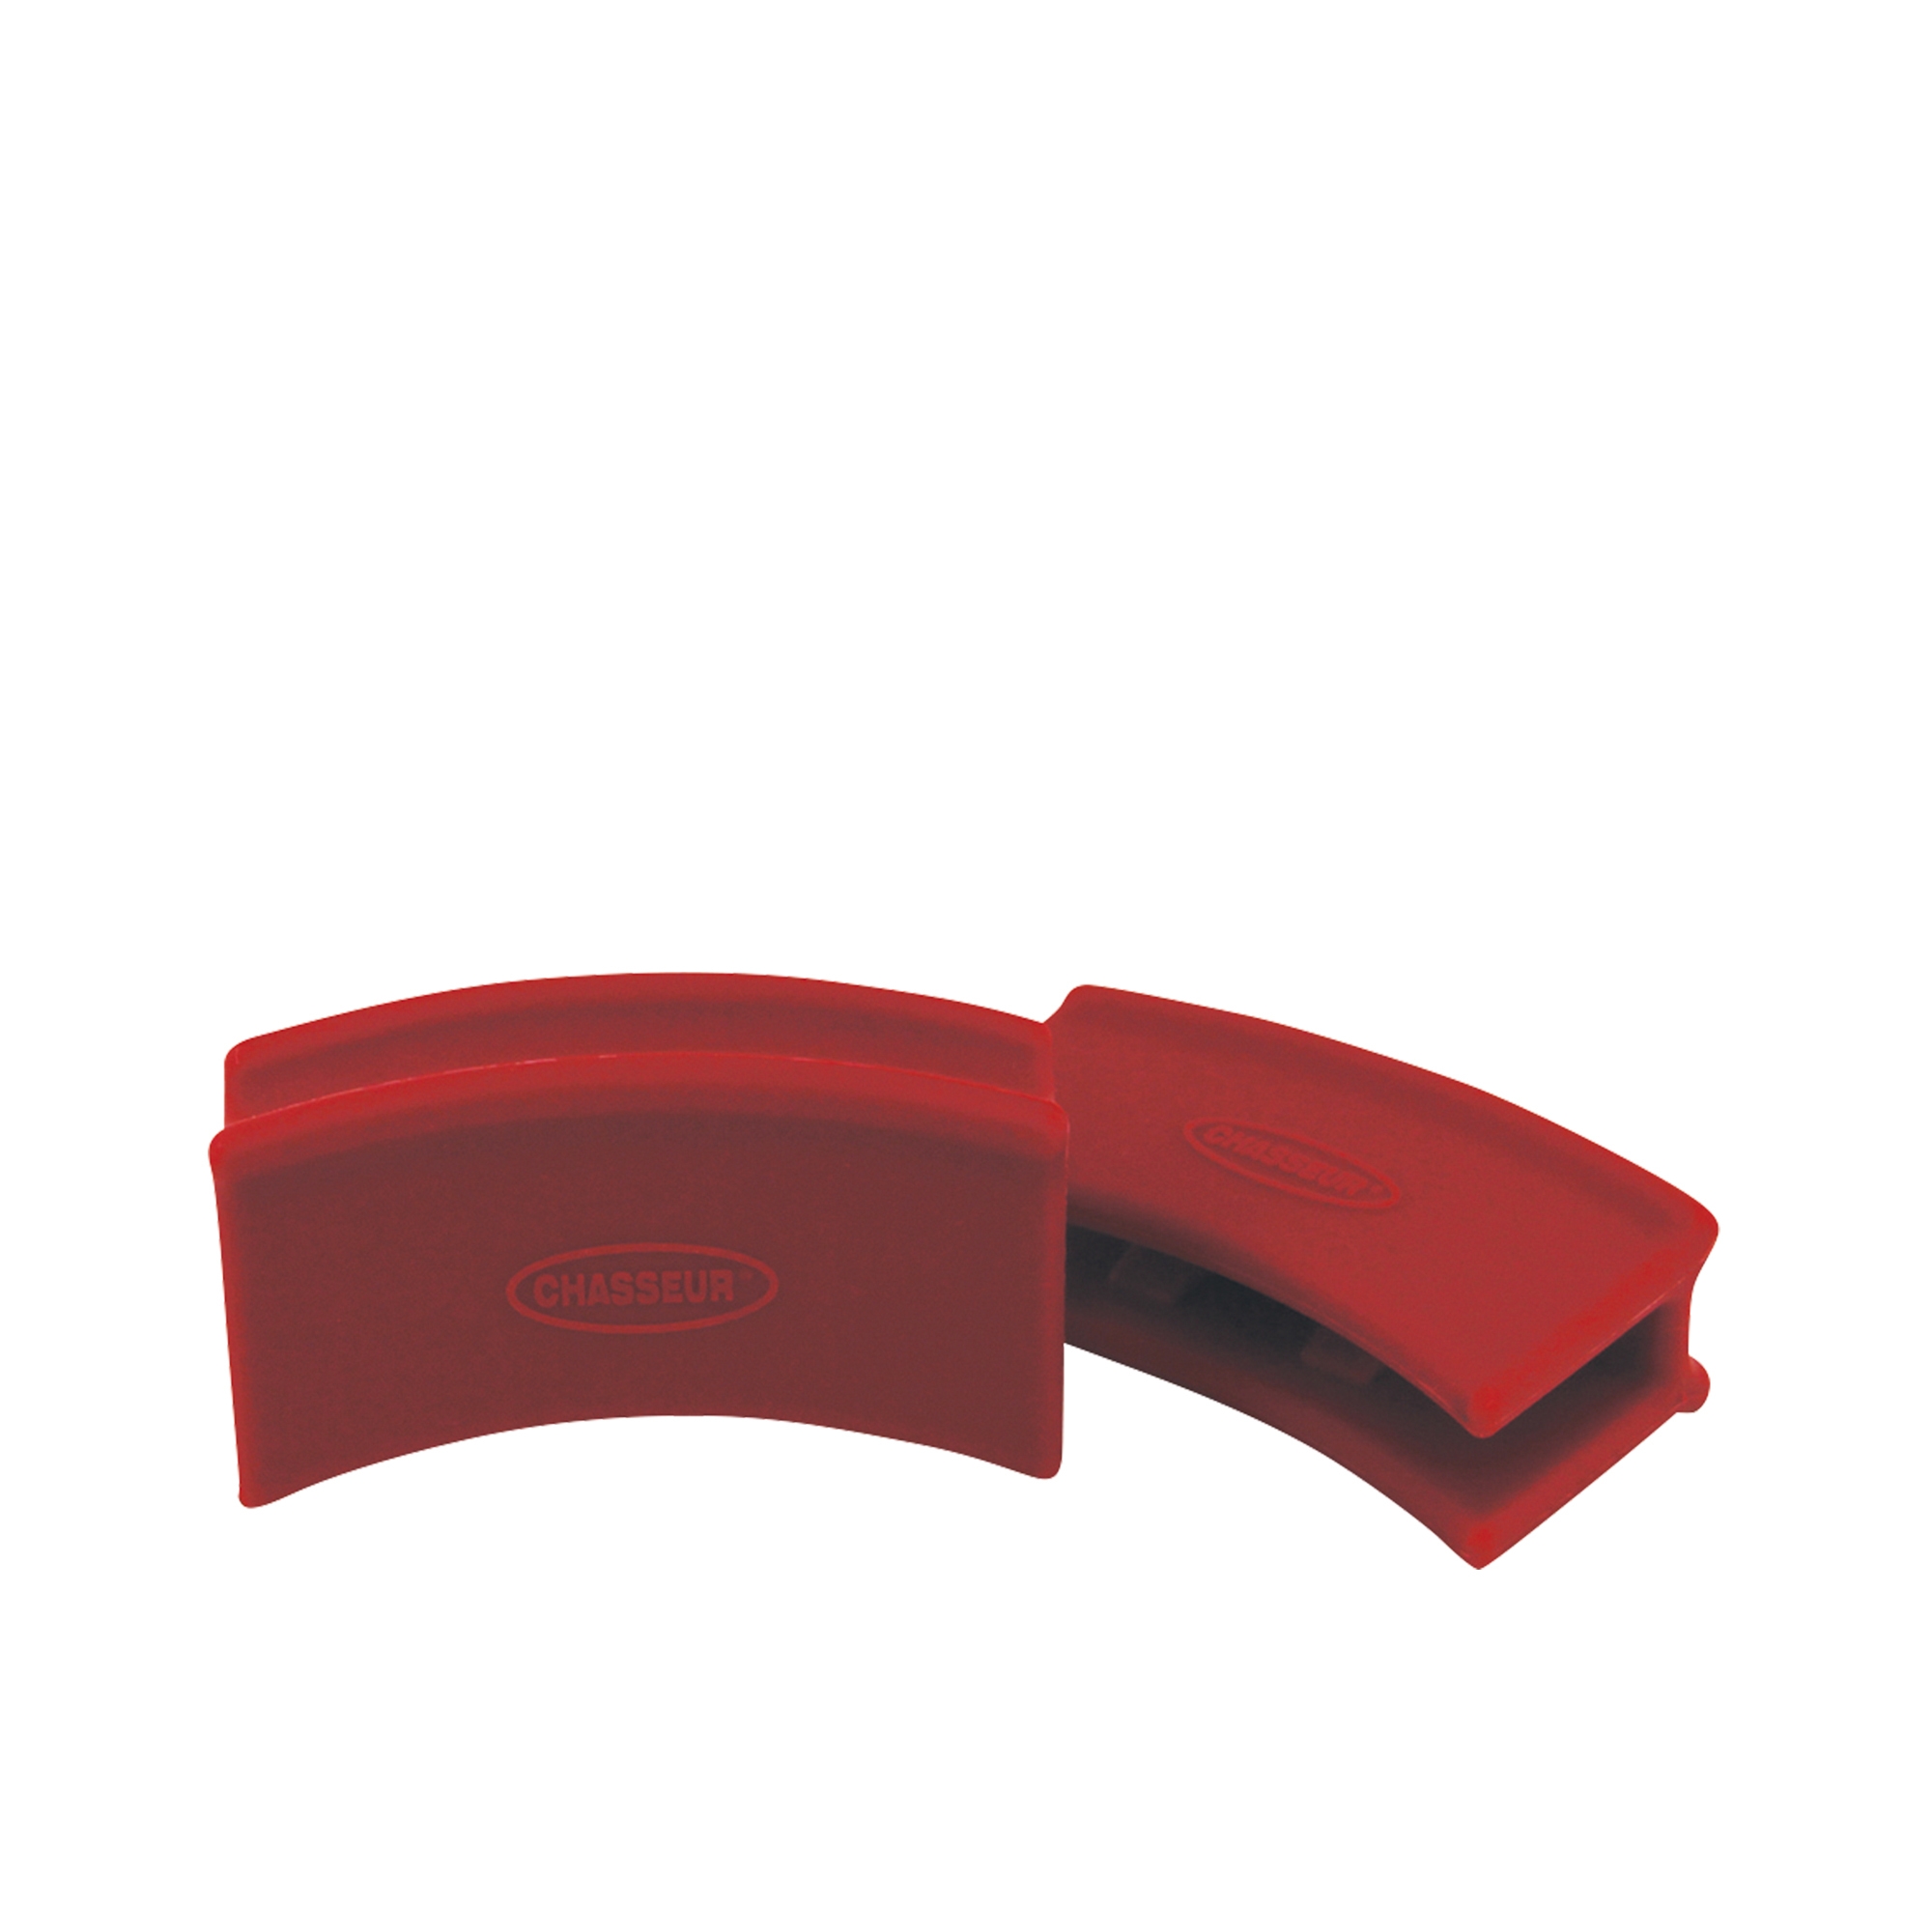 Chasseur Silicone Pot Handle Holder Set of 2 Red Image 1